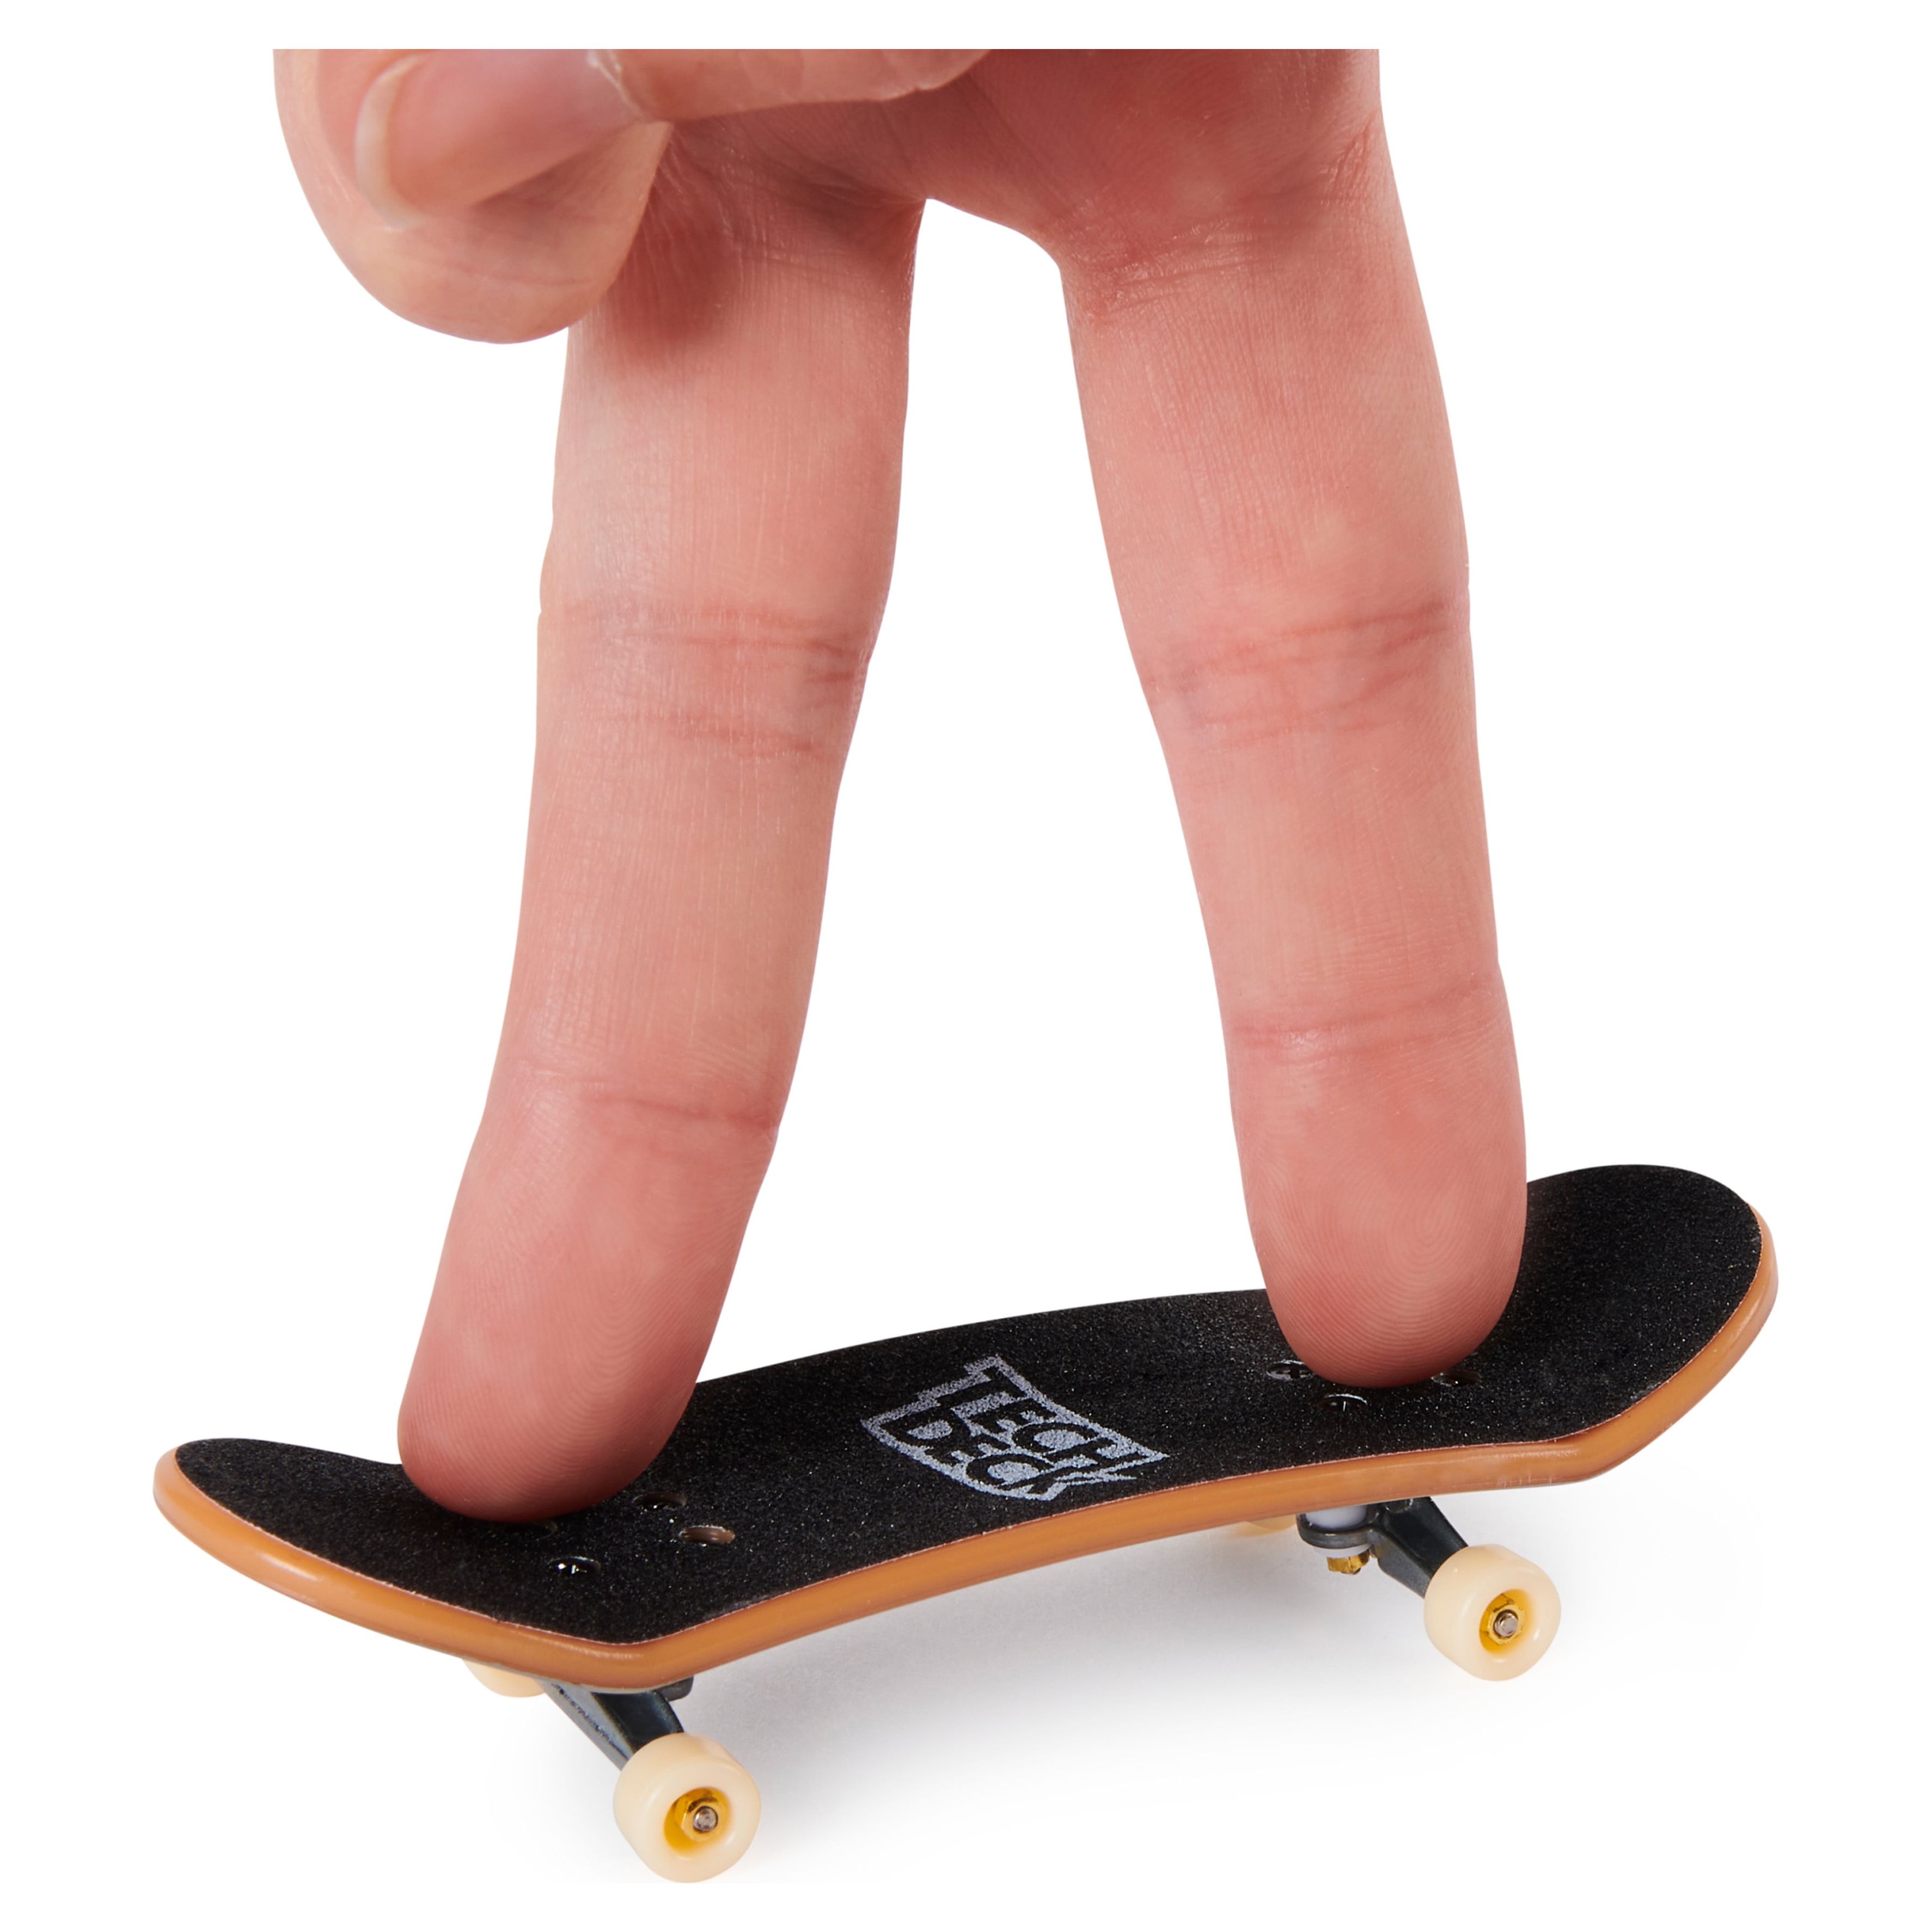 Tech Deck, DLX Pro 10-Pack of Collectible Fingerboards, For Skate Lovers, Kids Toy for  Ages 6 and up - image 4 of 7